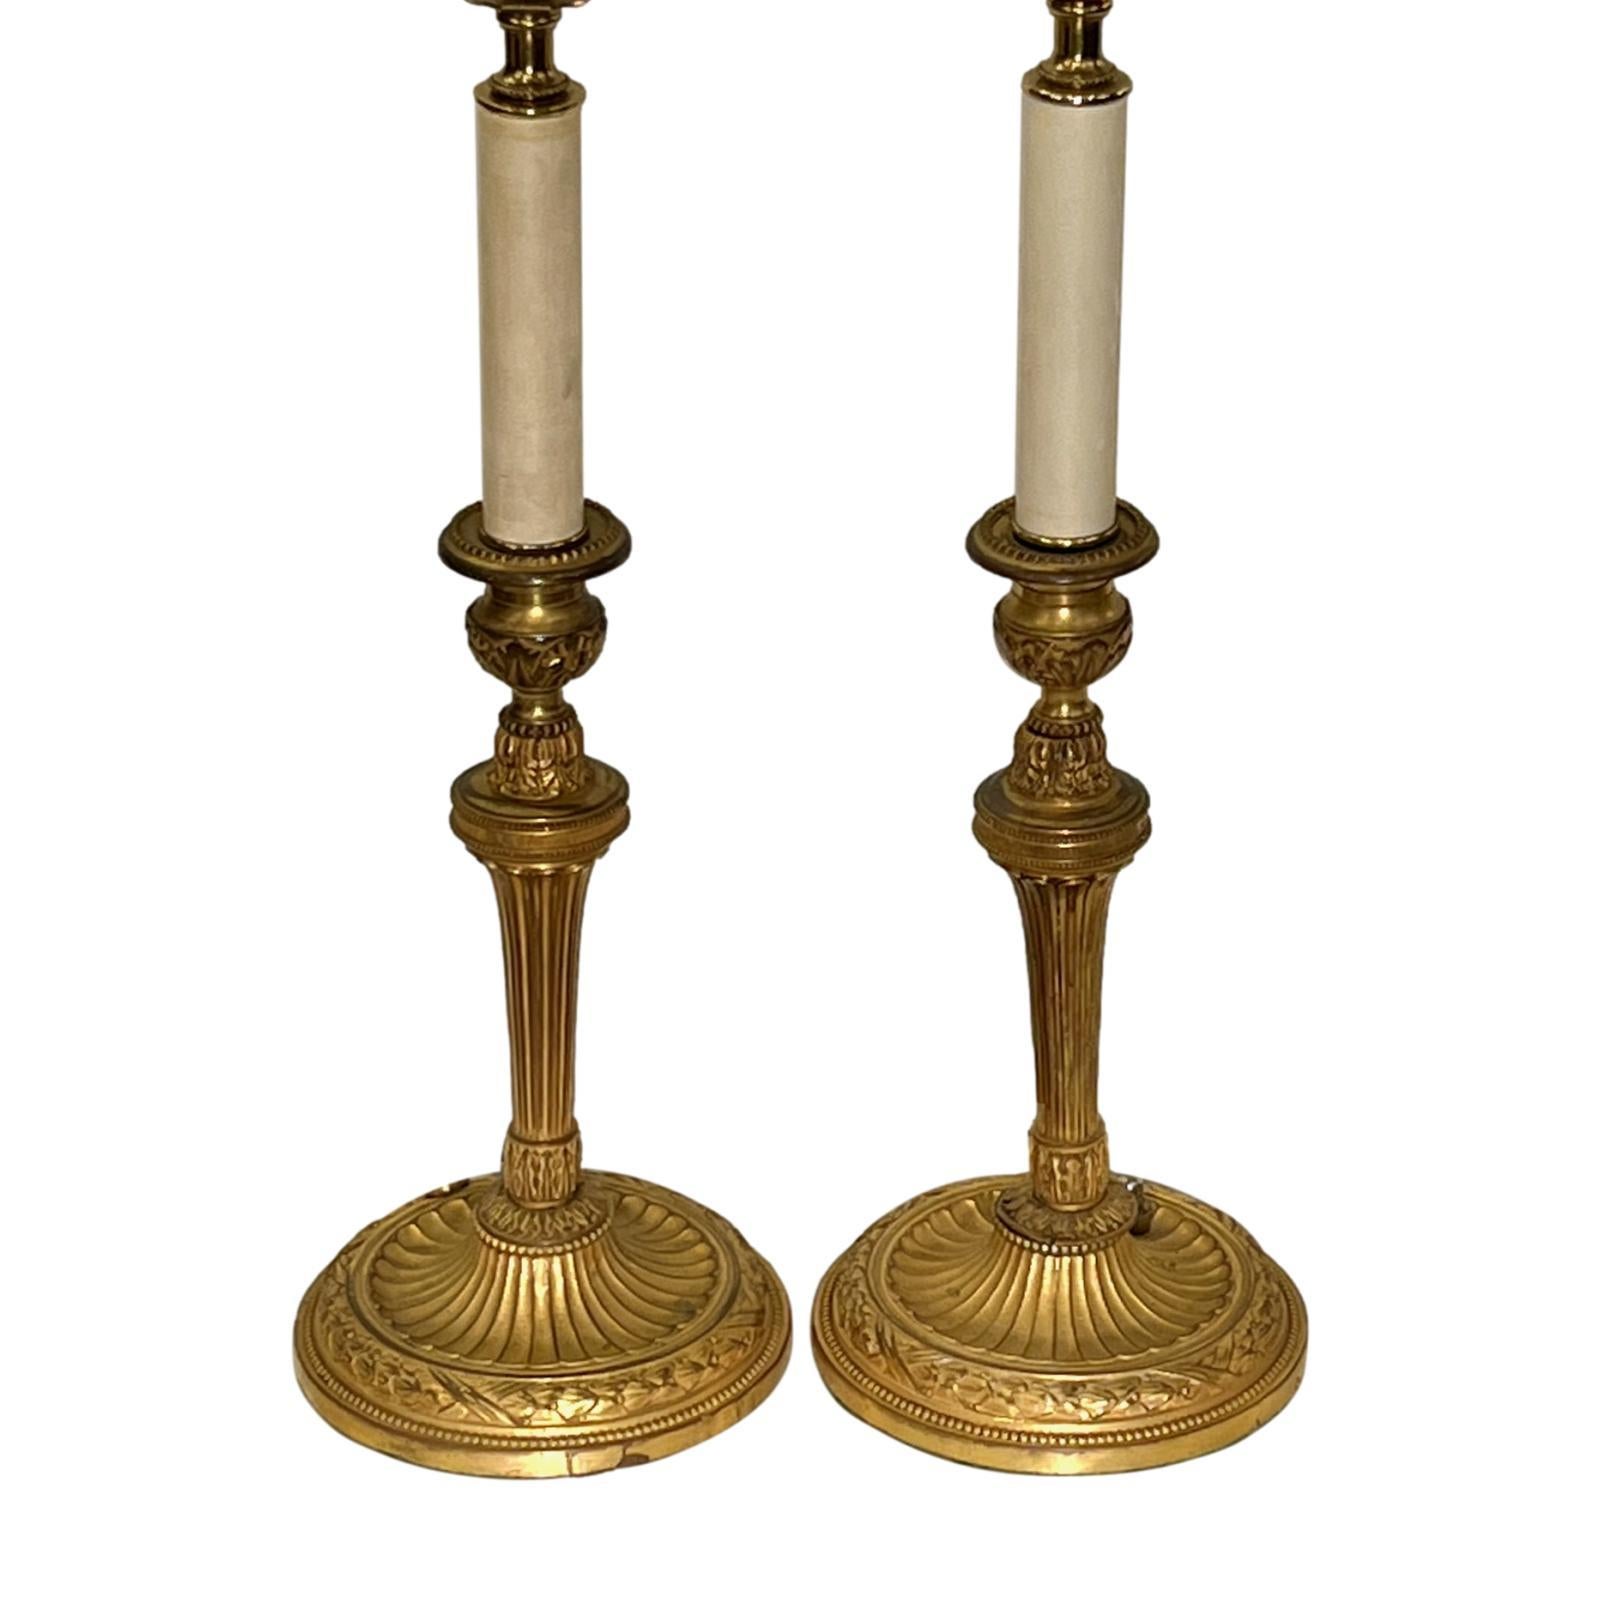 A pair of circa 1920's French bronze candlestick table lamps.

Measurements:
Height of body: 15